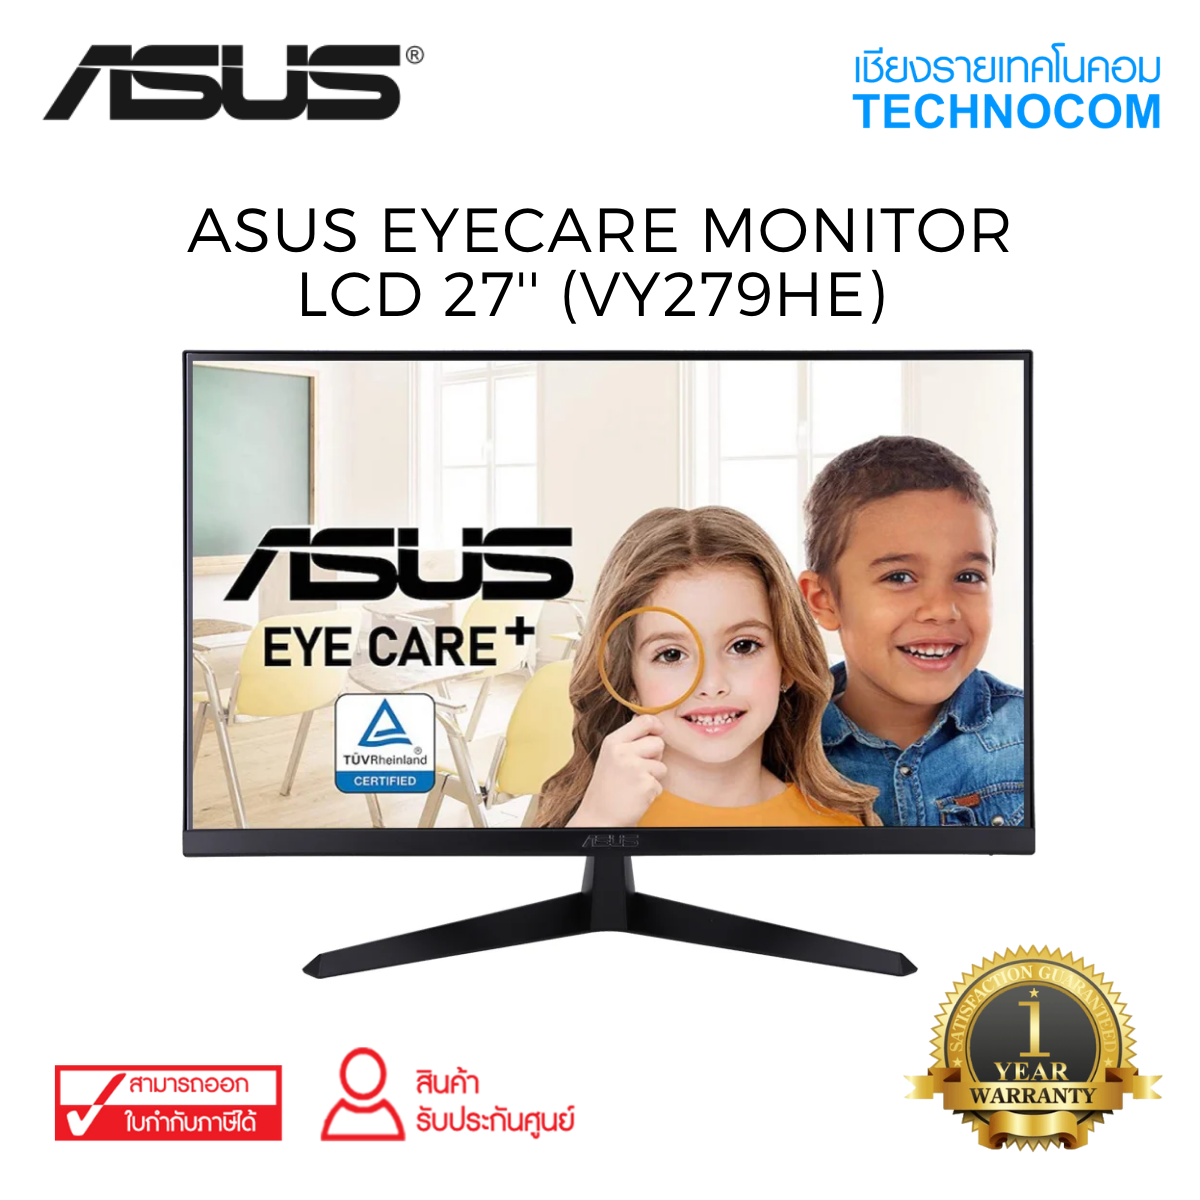 ASUS EYECARE MONITOR LCD 27'' (VY279HE)